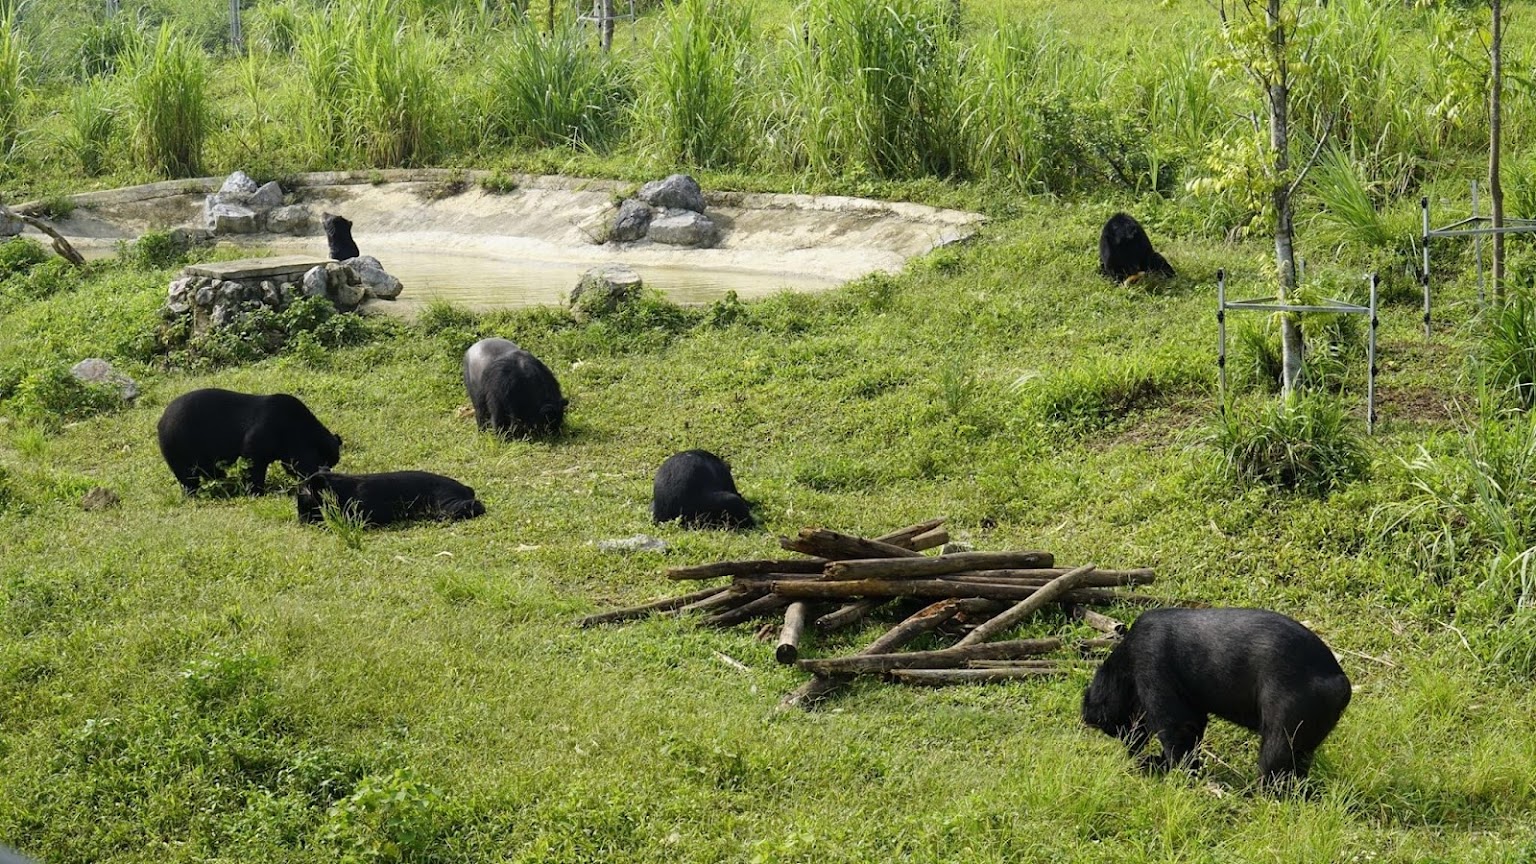 Bears playing in the enclosure